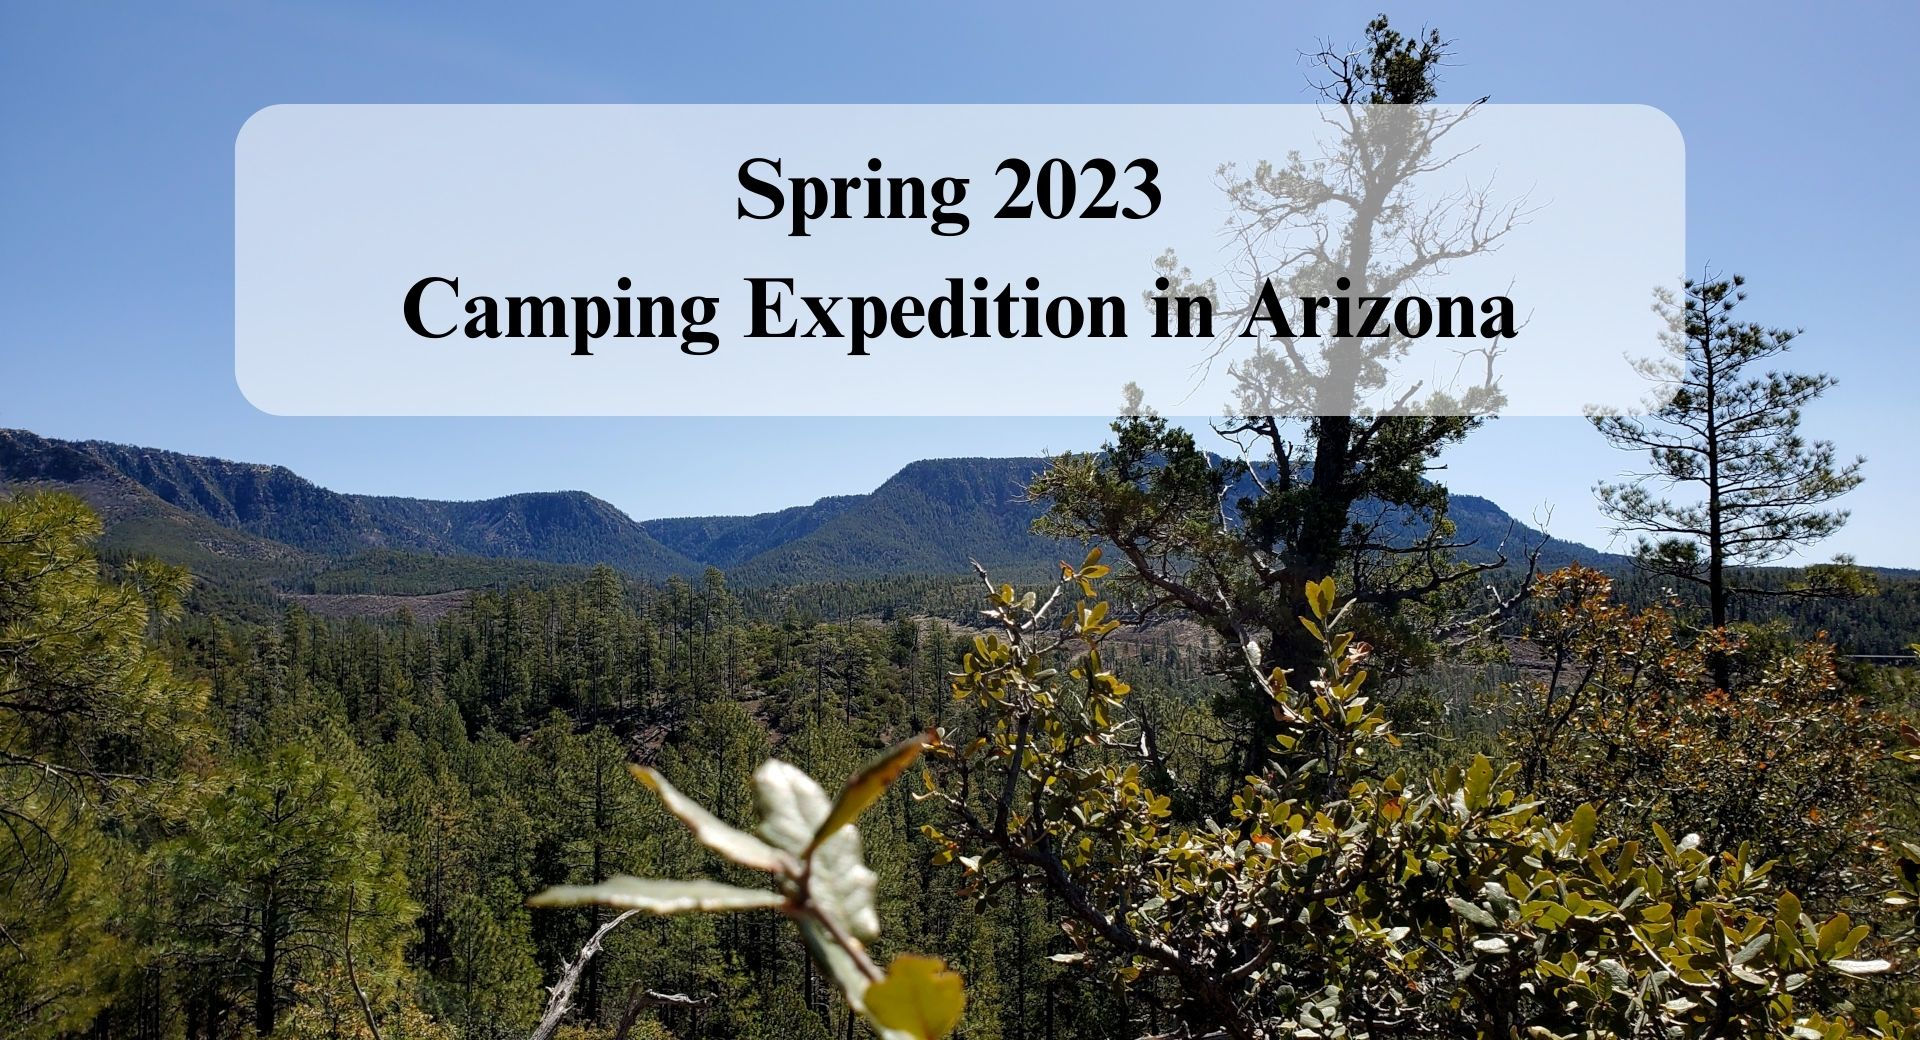 Spring 2023 Camping Expedition in Arizona